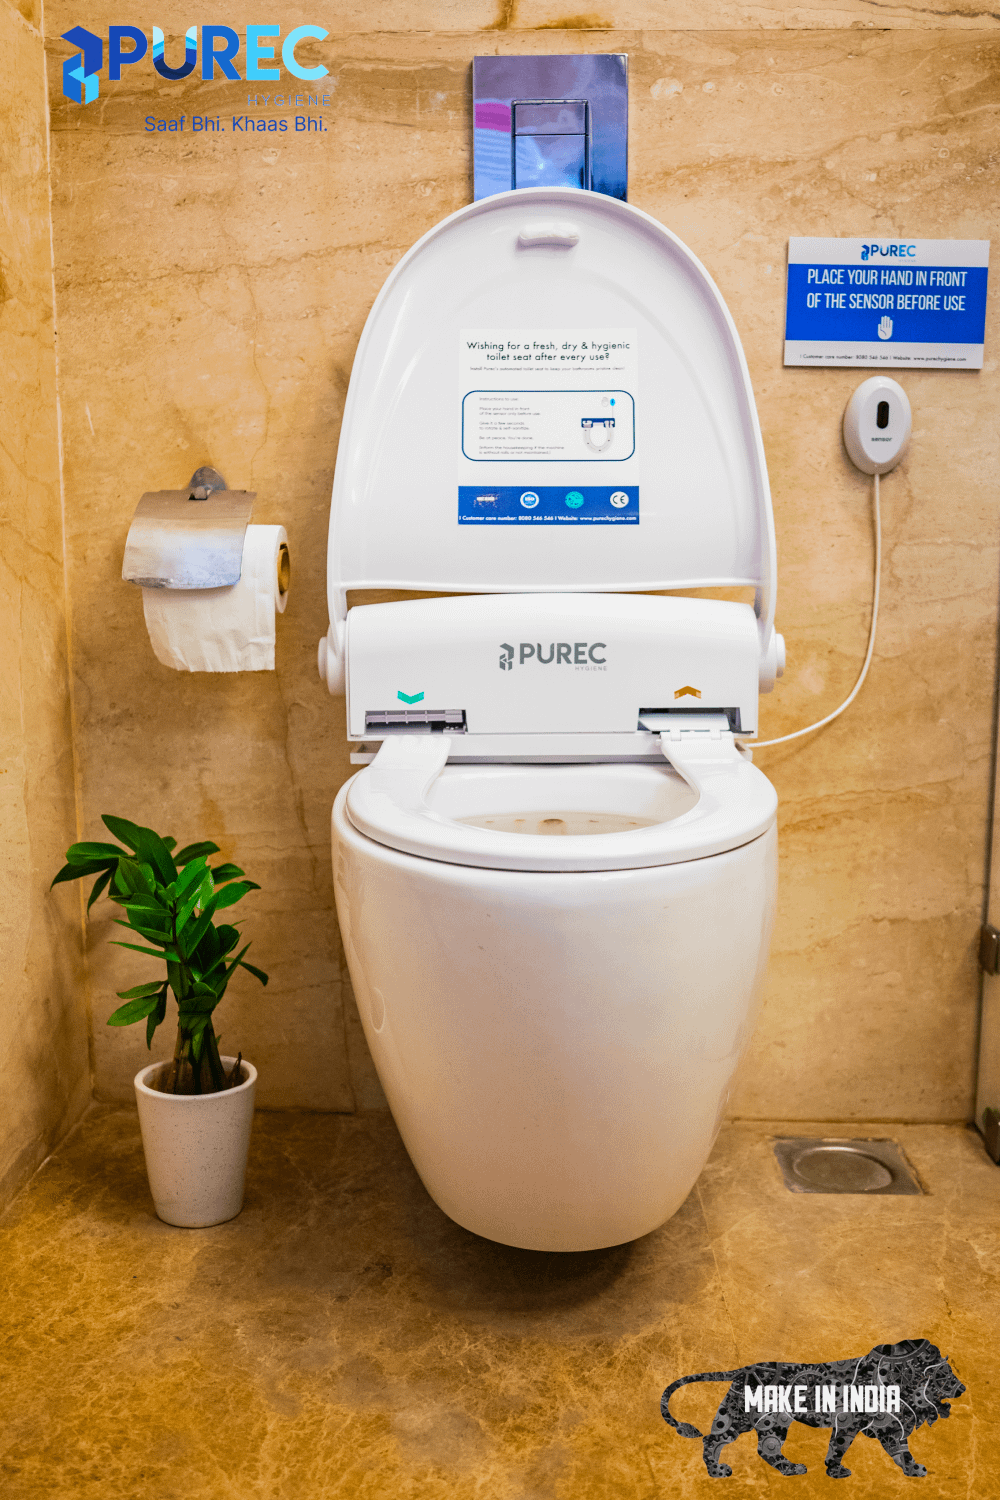 Revolutionary Automatic Toilet Seat - o02: Touchless. Germ-free.